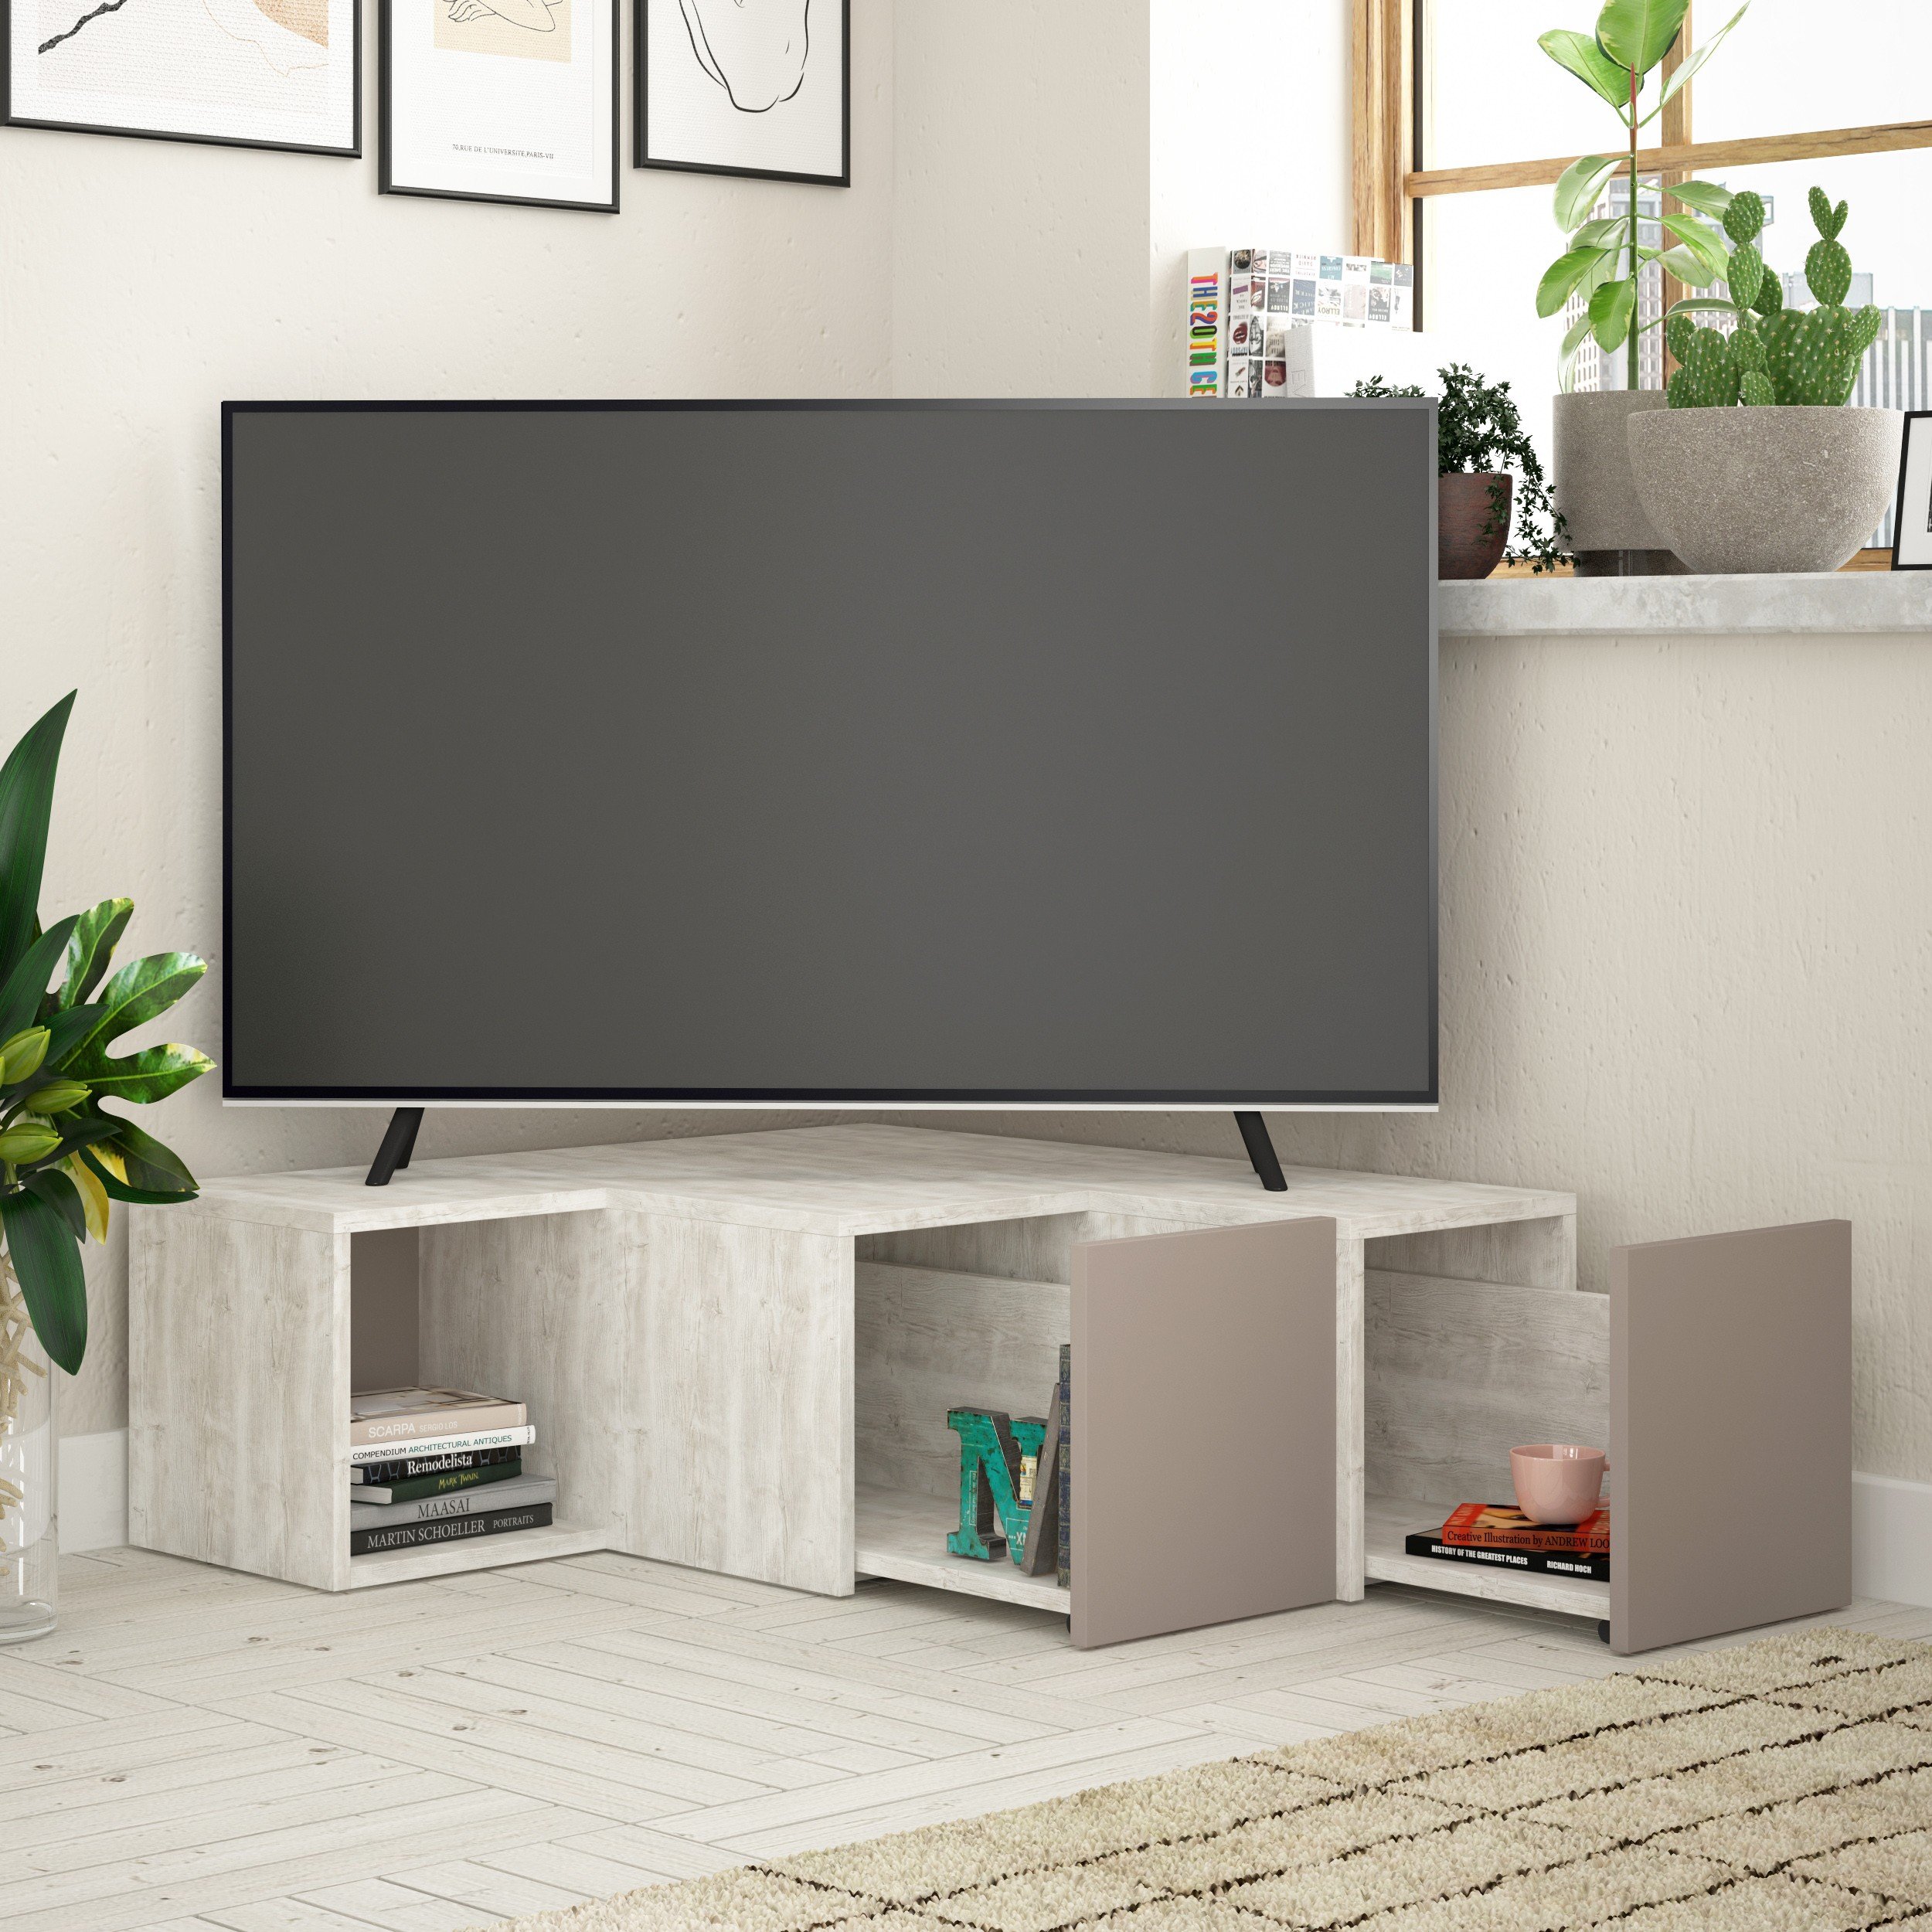 COMPACT TV STAND - ANCIENT WHITE - LIGHT MOCHA - M.TV.16544.5